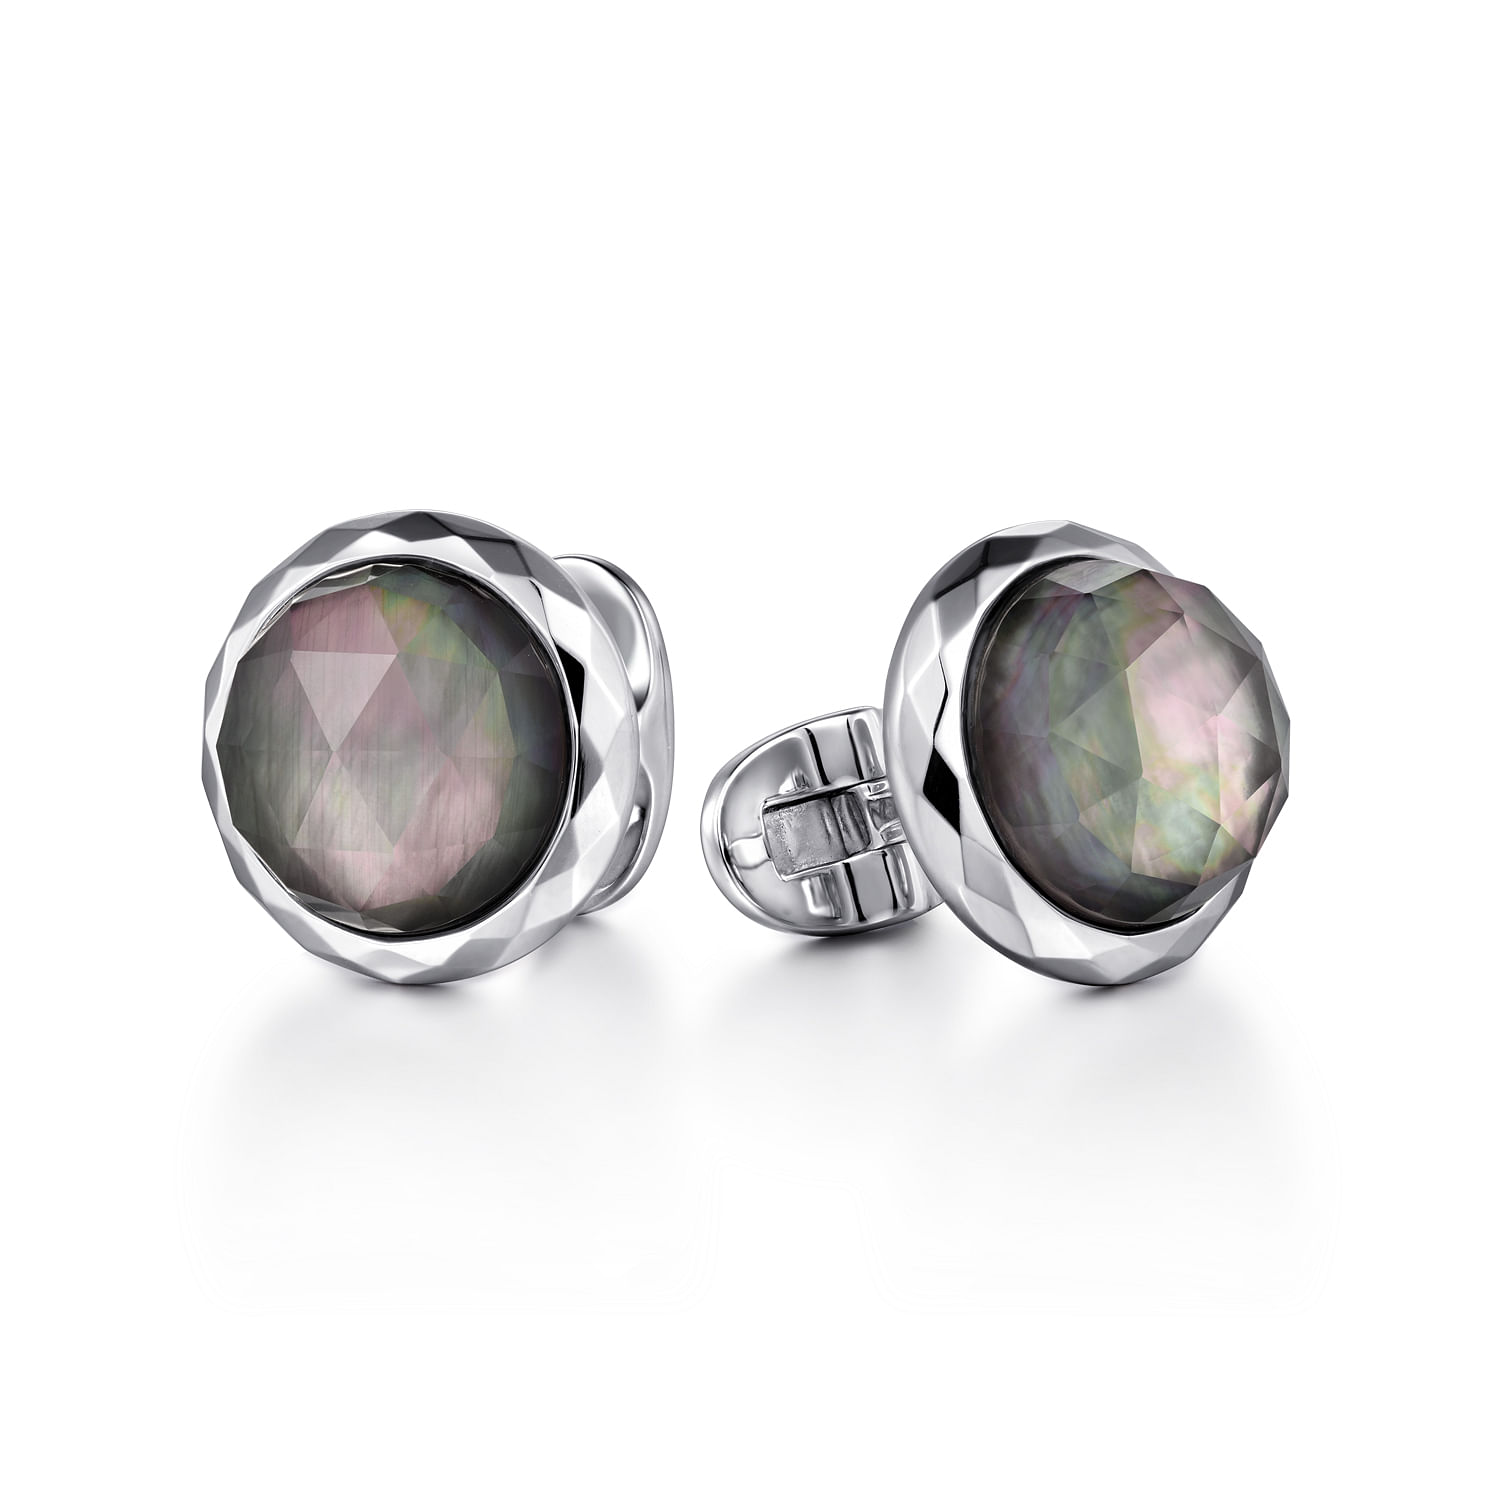 925 Sterling Silver Round Cufflinks with Faceted Black Mother of Pearl Stones